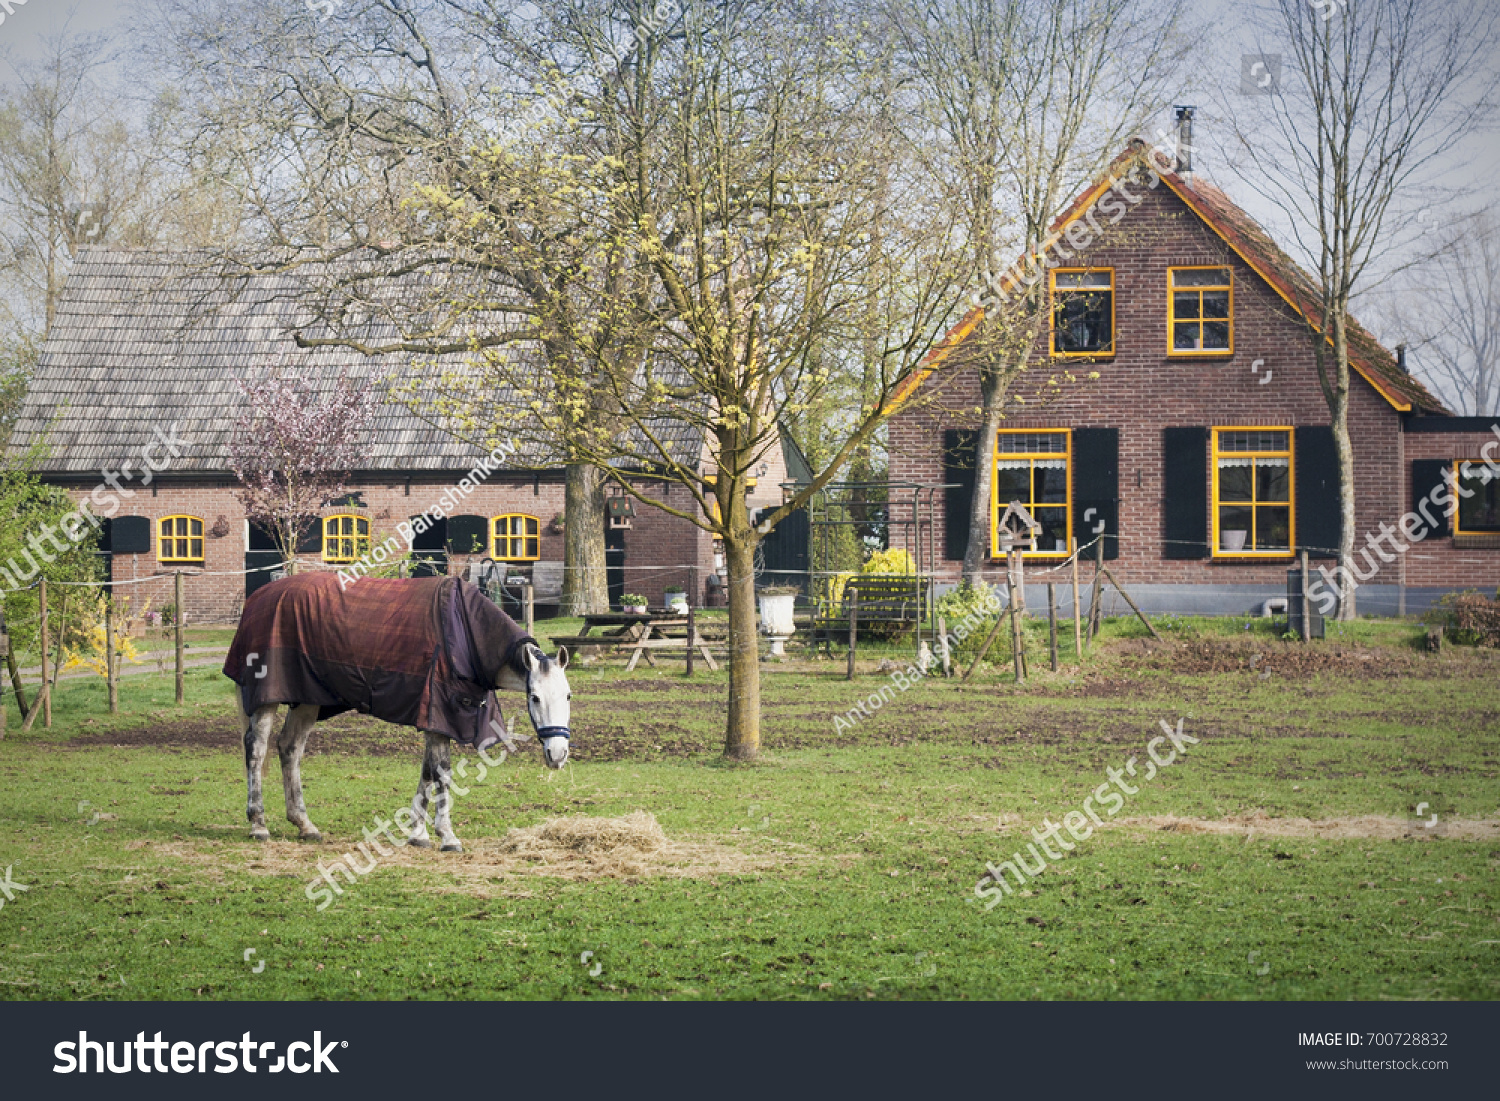 Horsecloth on horse at farm with tiny house on background. Knight horse eating grass. Cloth horse in countryside #700728832